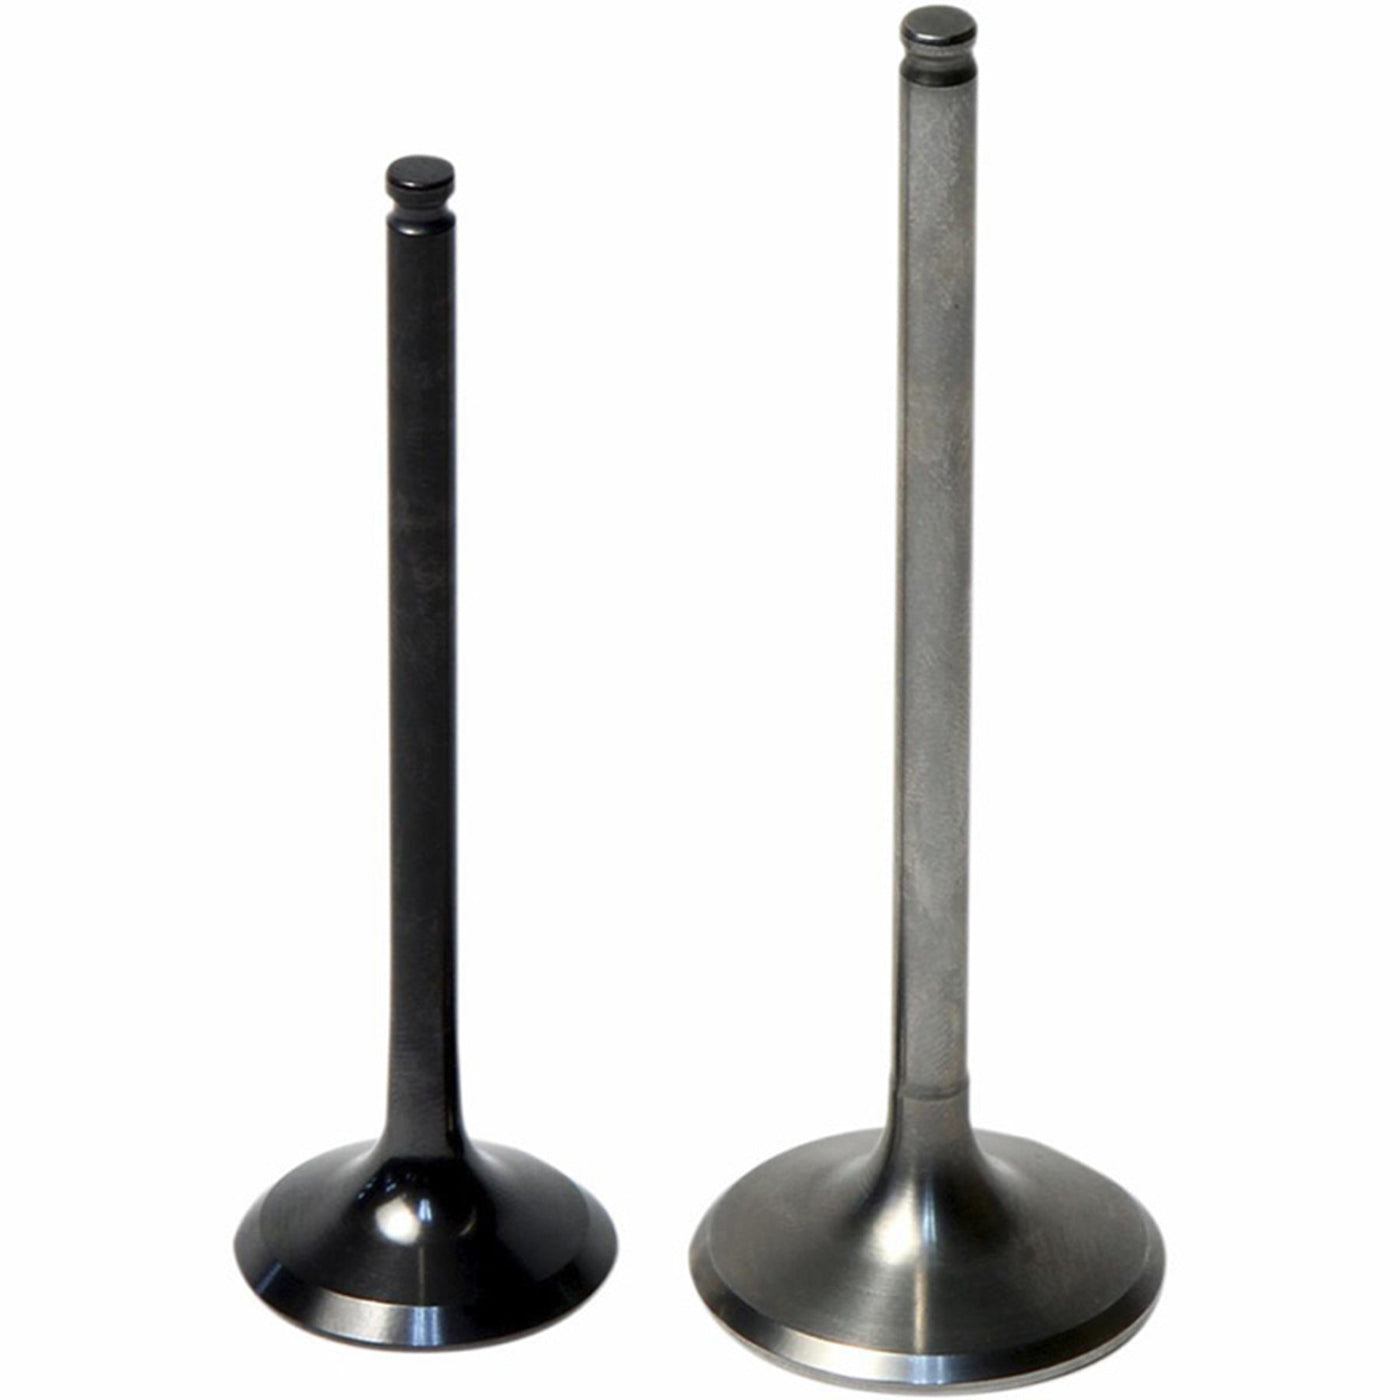 Hotcams 8400005-2 Intake and Exhaust Valves #8400005-2